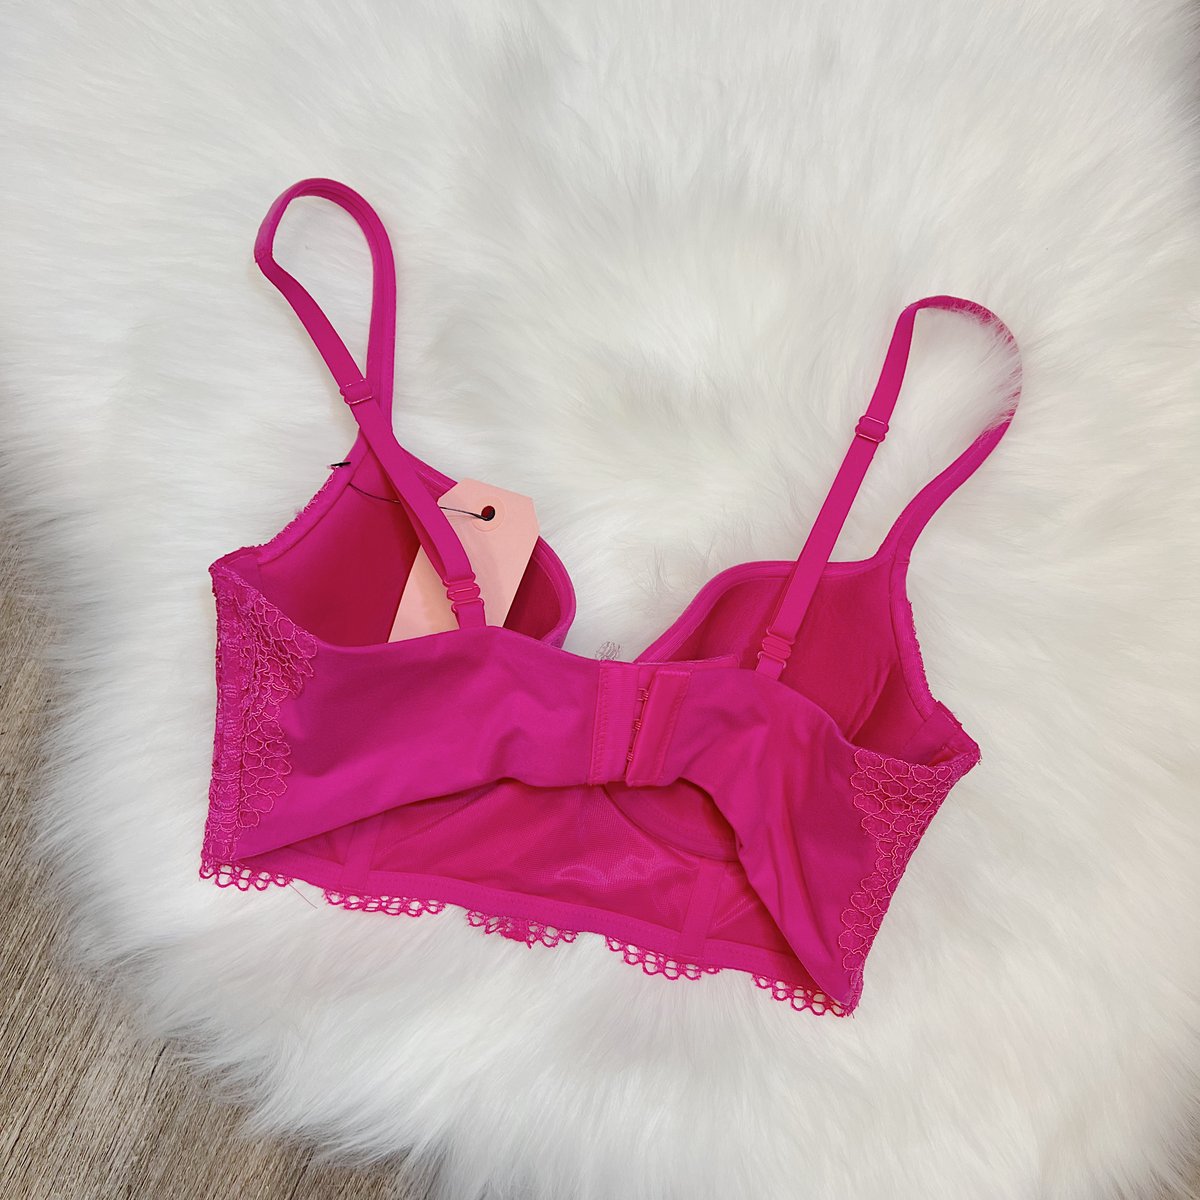 Victoria's Secret Incredible Bra 34D Pink Size undefined - $50 New With  Tags - From debbie